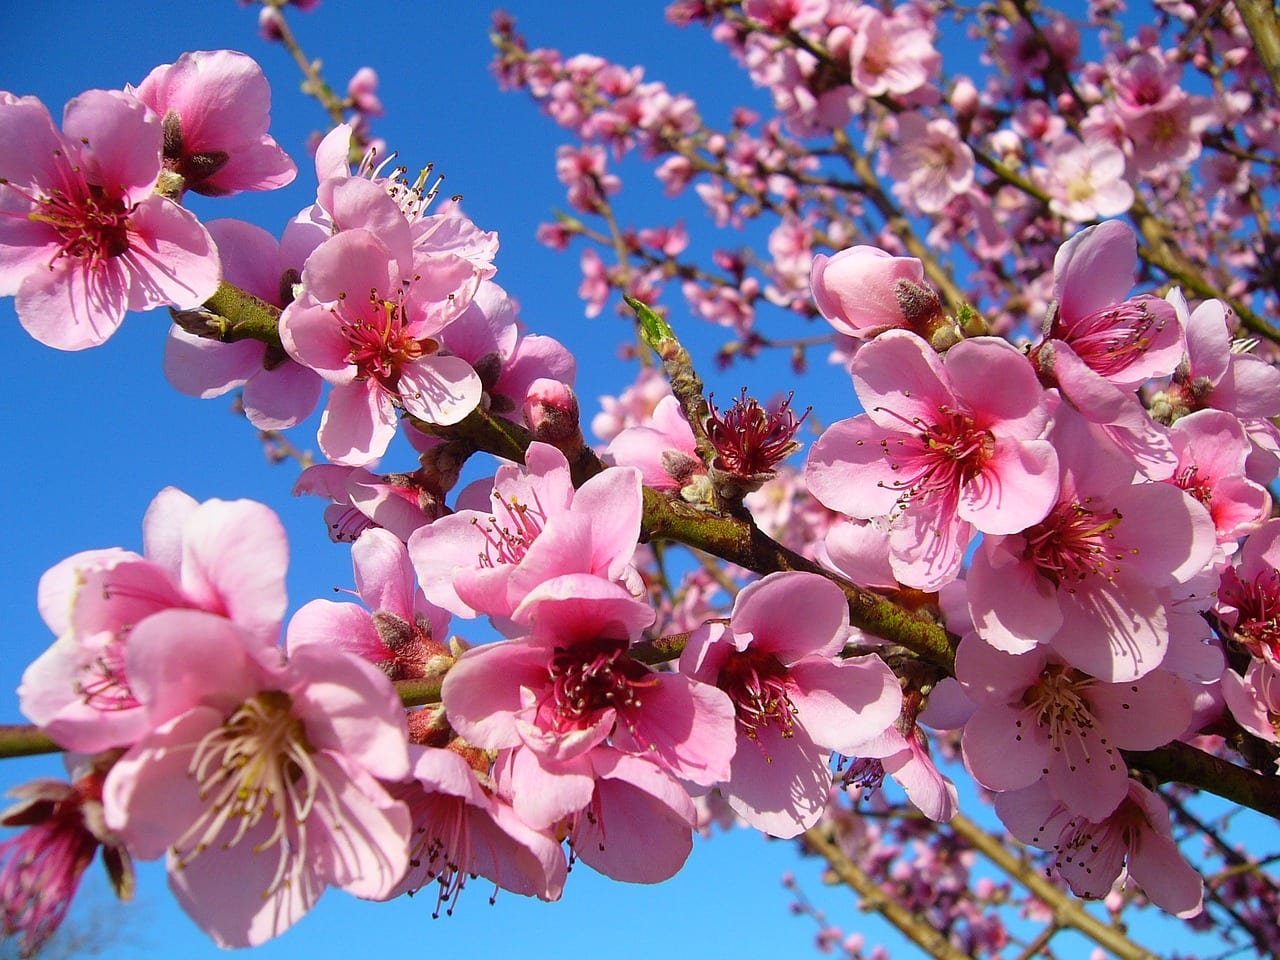 Fruit trees requires specific chill hours in order to produce buds, flowers, and fruit.